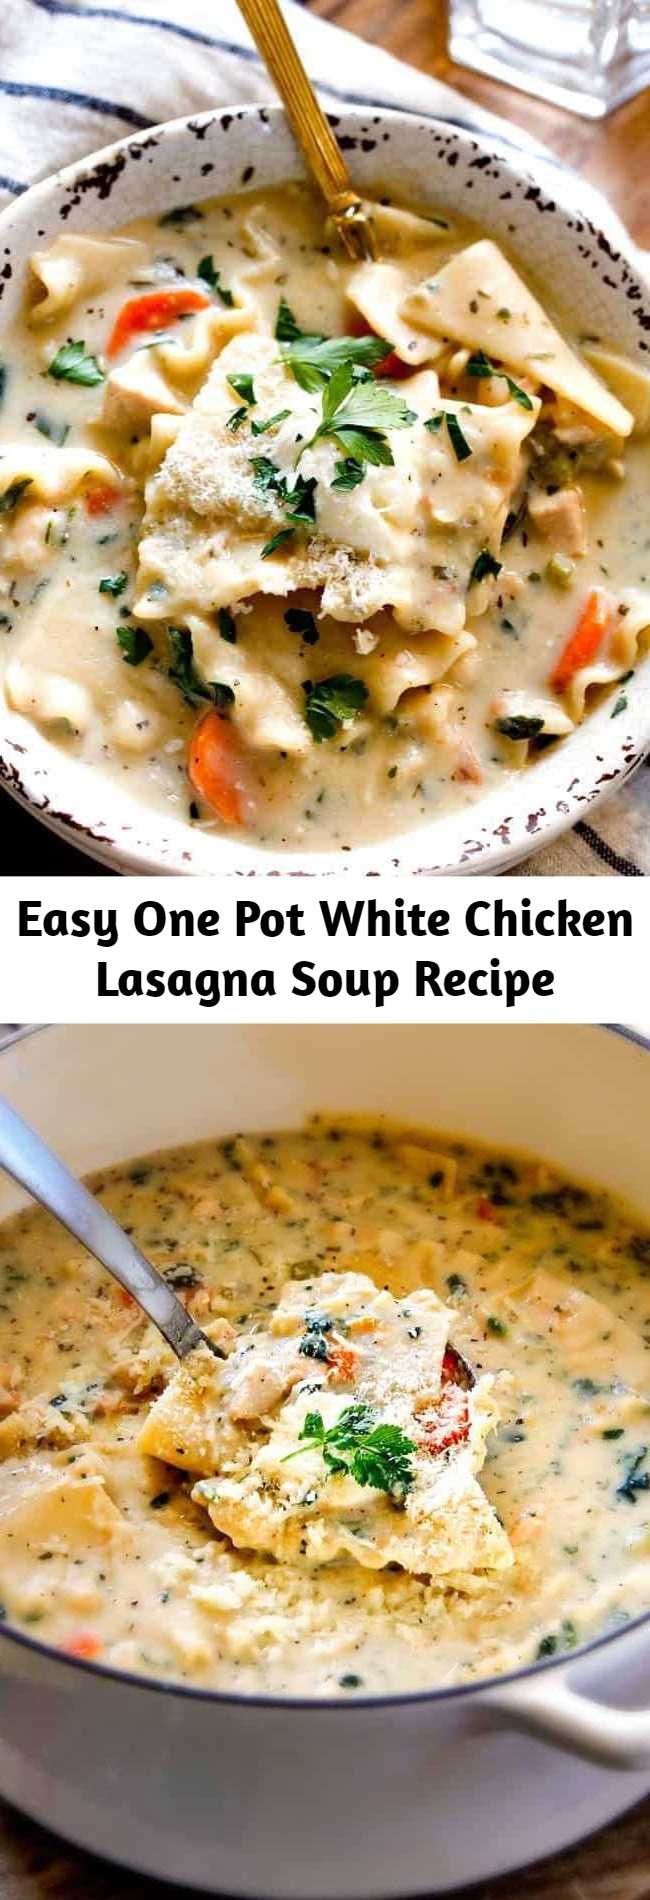 Easy One Pot White Chicken Lasagna Soup Recipe - This easy White Chicken Lasagna Soup tastes just like white chicken lasagna with cheesy layers of noodles smothered in velvety Italian spiced Parmesan infused sauce without all the layering or dishes! Simply saute chicken and veggies and dump in all ingredients and simmer away for a pot of velvety, slurpilicoius flavor!